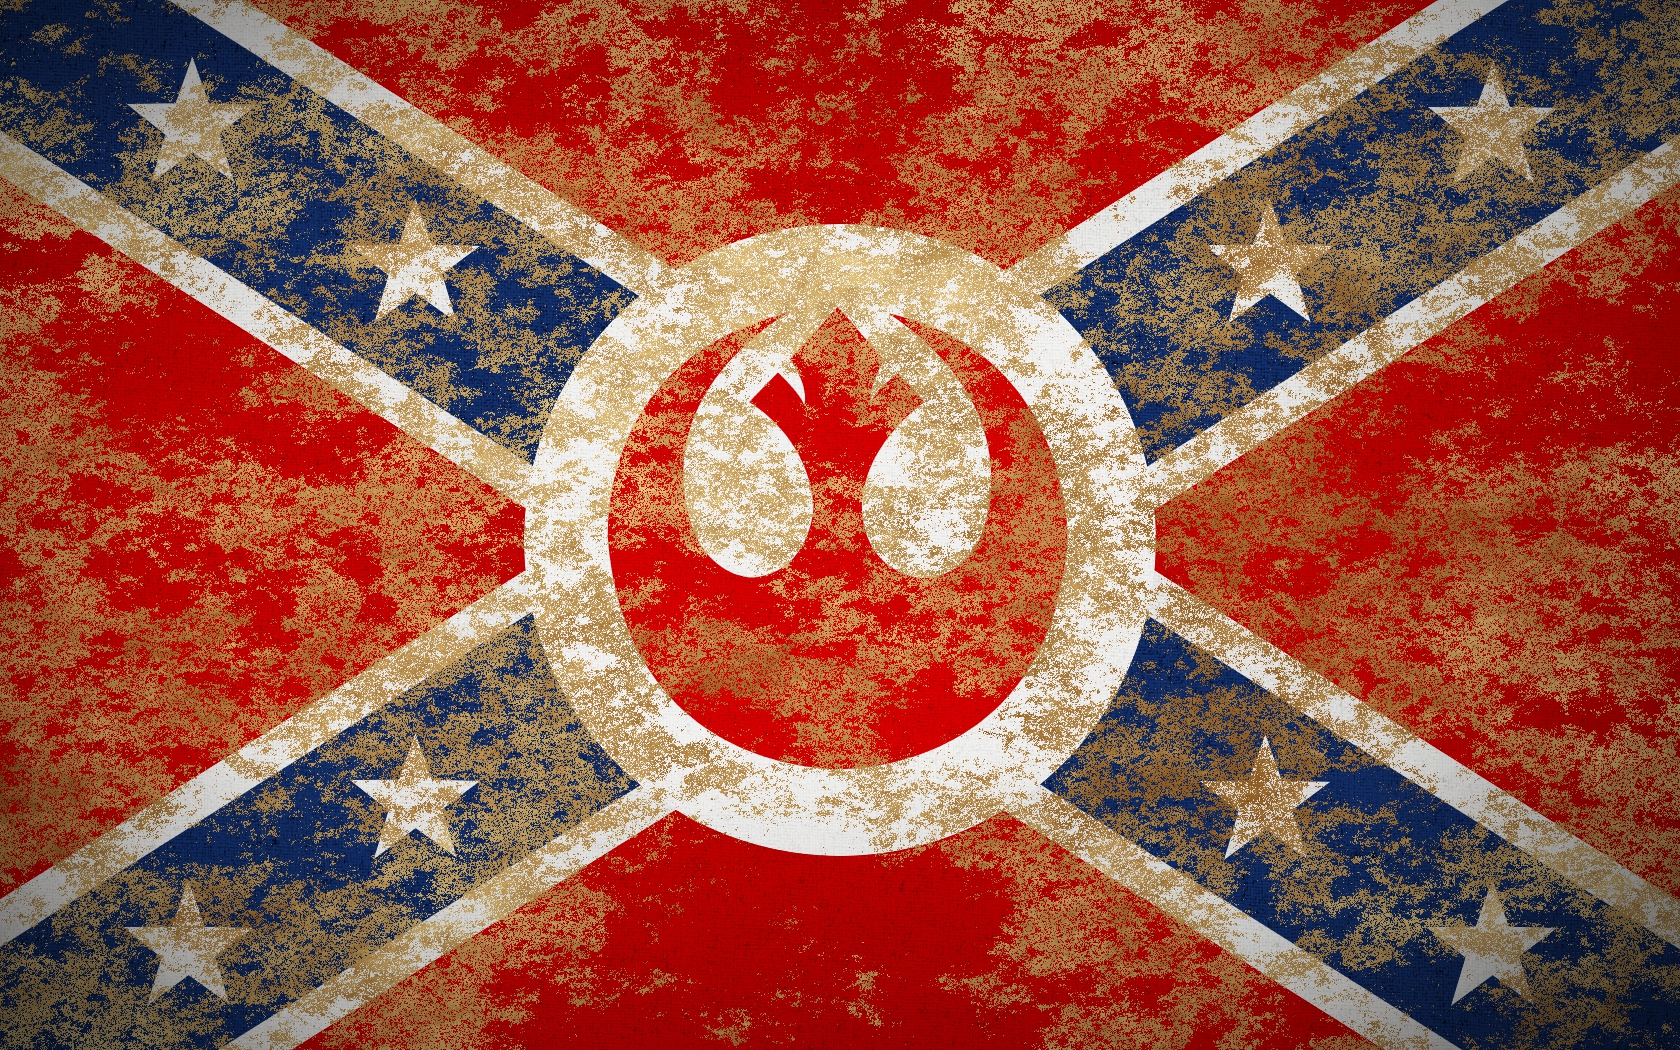 Rebel Alliance Yell Confederate Flag Image Le Fancy